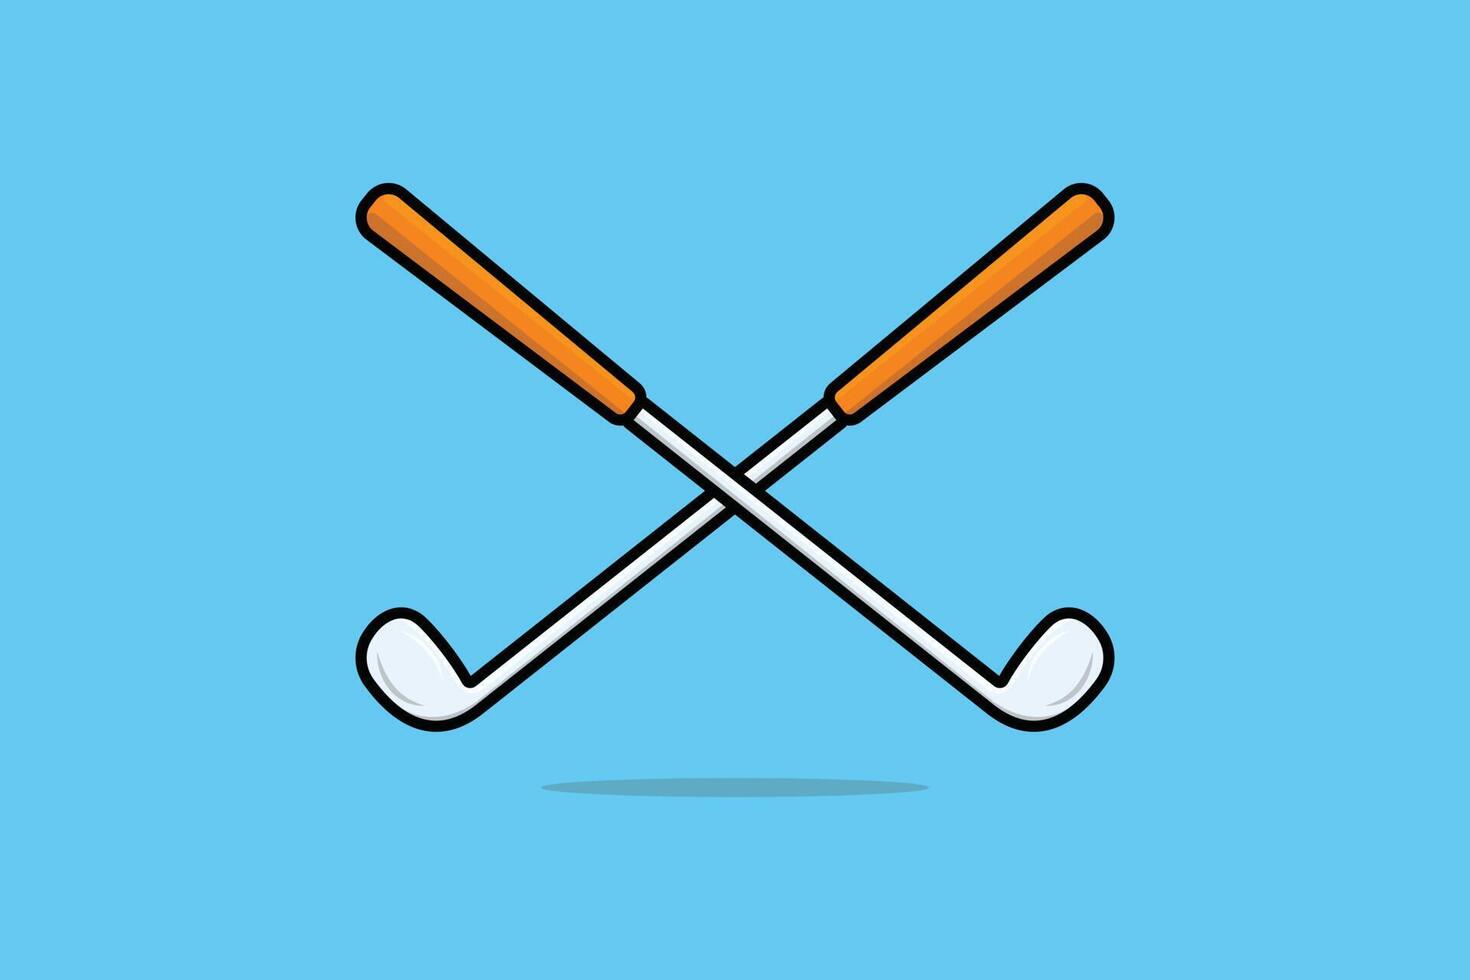 Golf Sticks in cross sign vector illustration. Sport objects icon concept. Two crossed golf clubs vector design with shadow. Modern professional golf game sticks icon illustration on blue background.